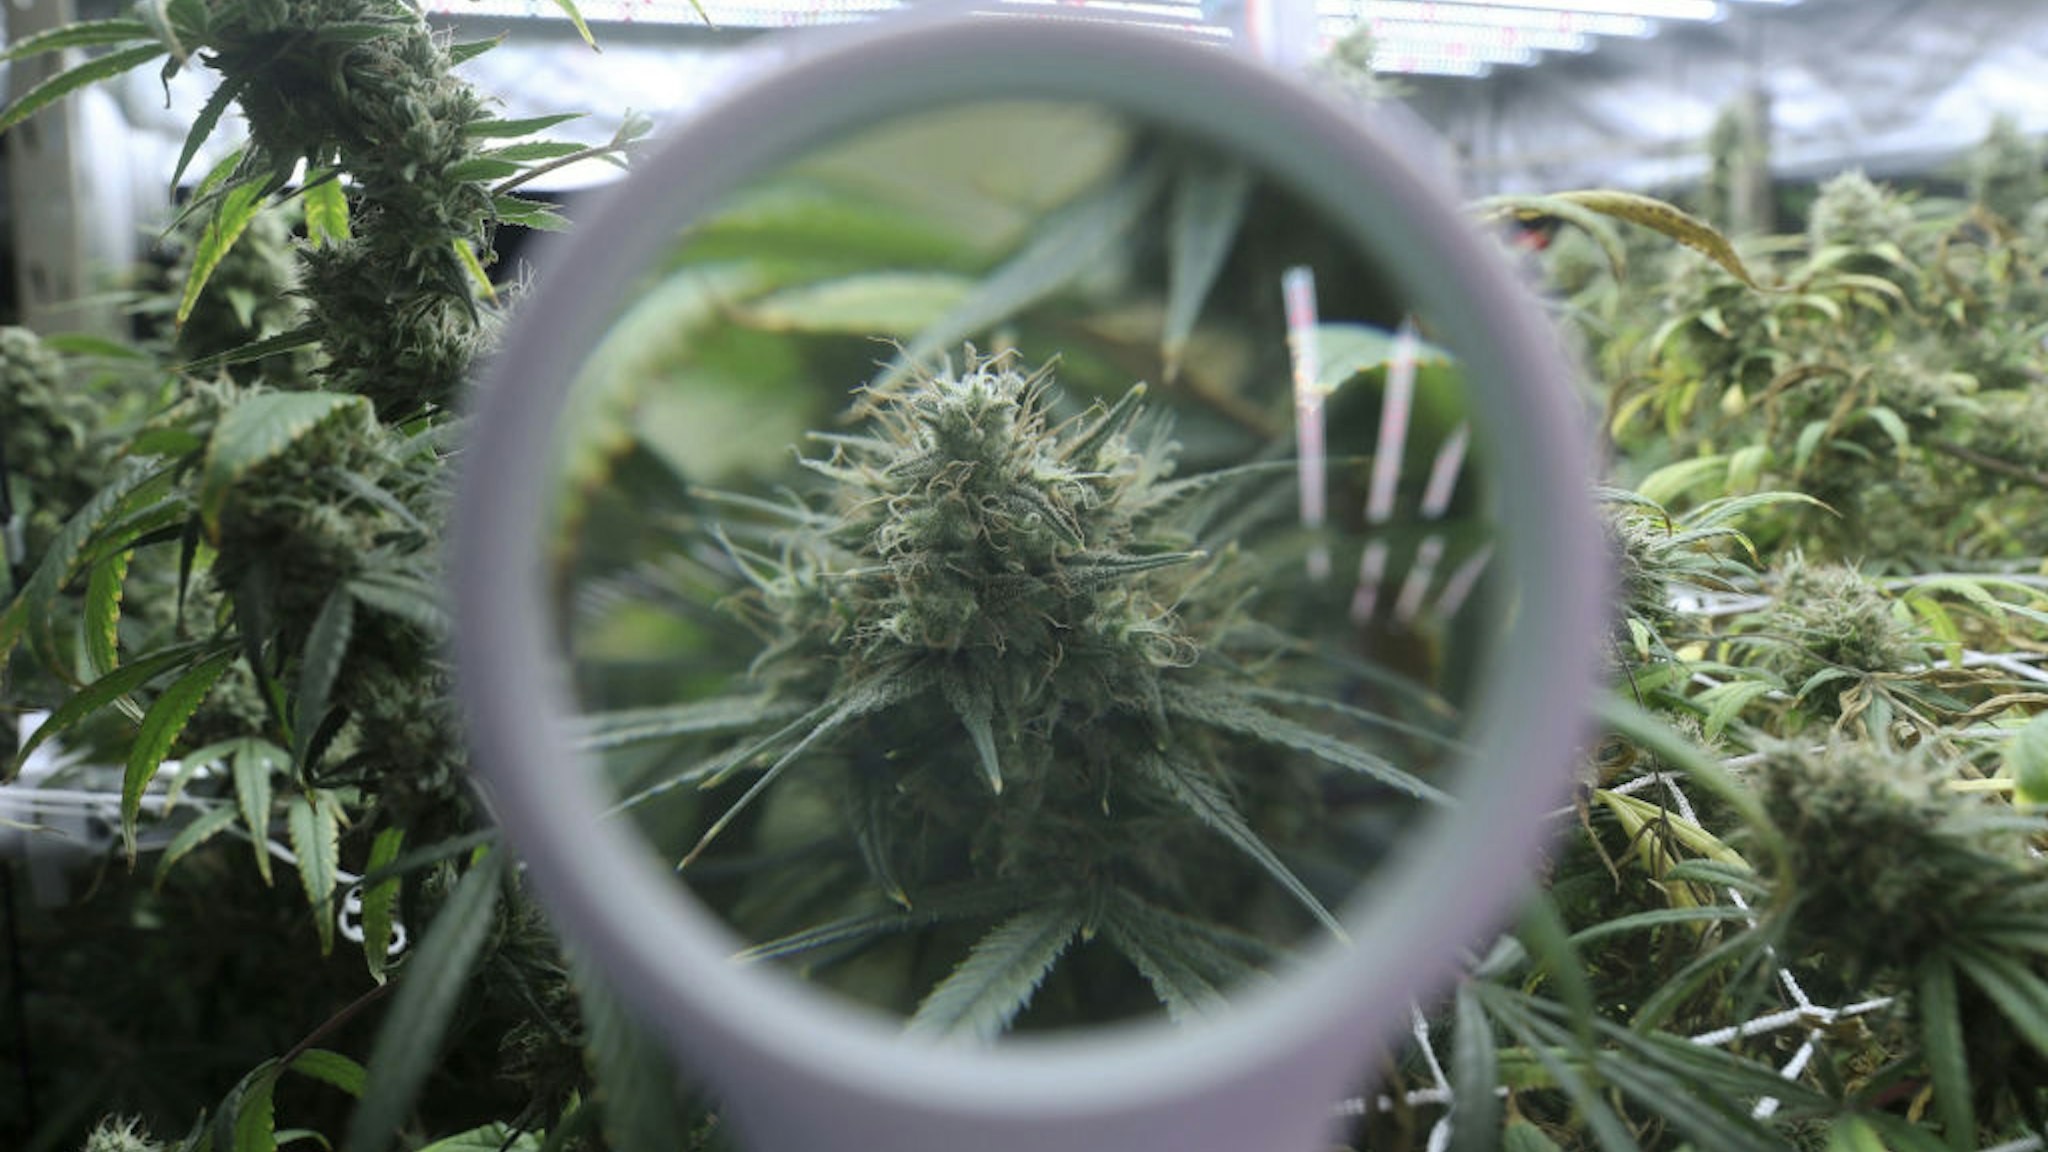 A flowering cannabis plant is seen through a magnifying glass at a tour called &quot;Chitiva,&quot; given by workers at Prescribd, a cannabis cultivation company, at one of its cultivation centers Saturday, July 17, 2021, in Bridgeview, Illinois. The interactive tour shows the start-to-finish process of growing cannabis.